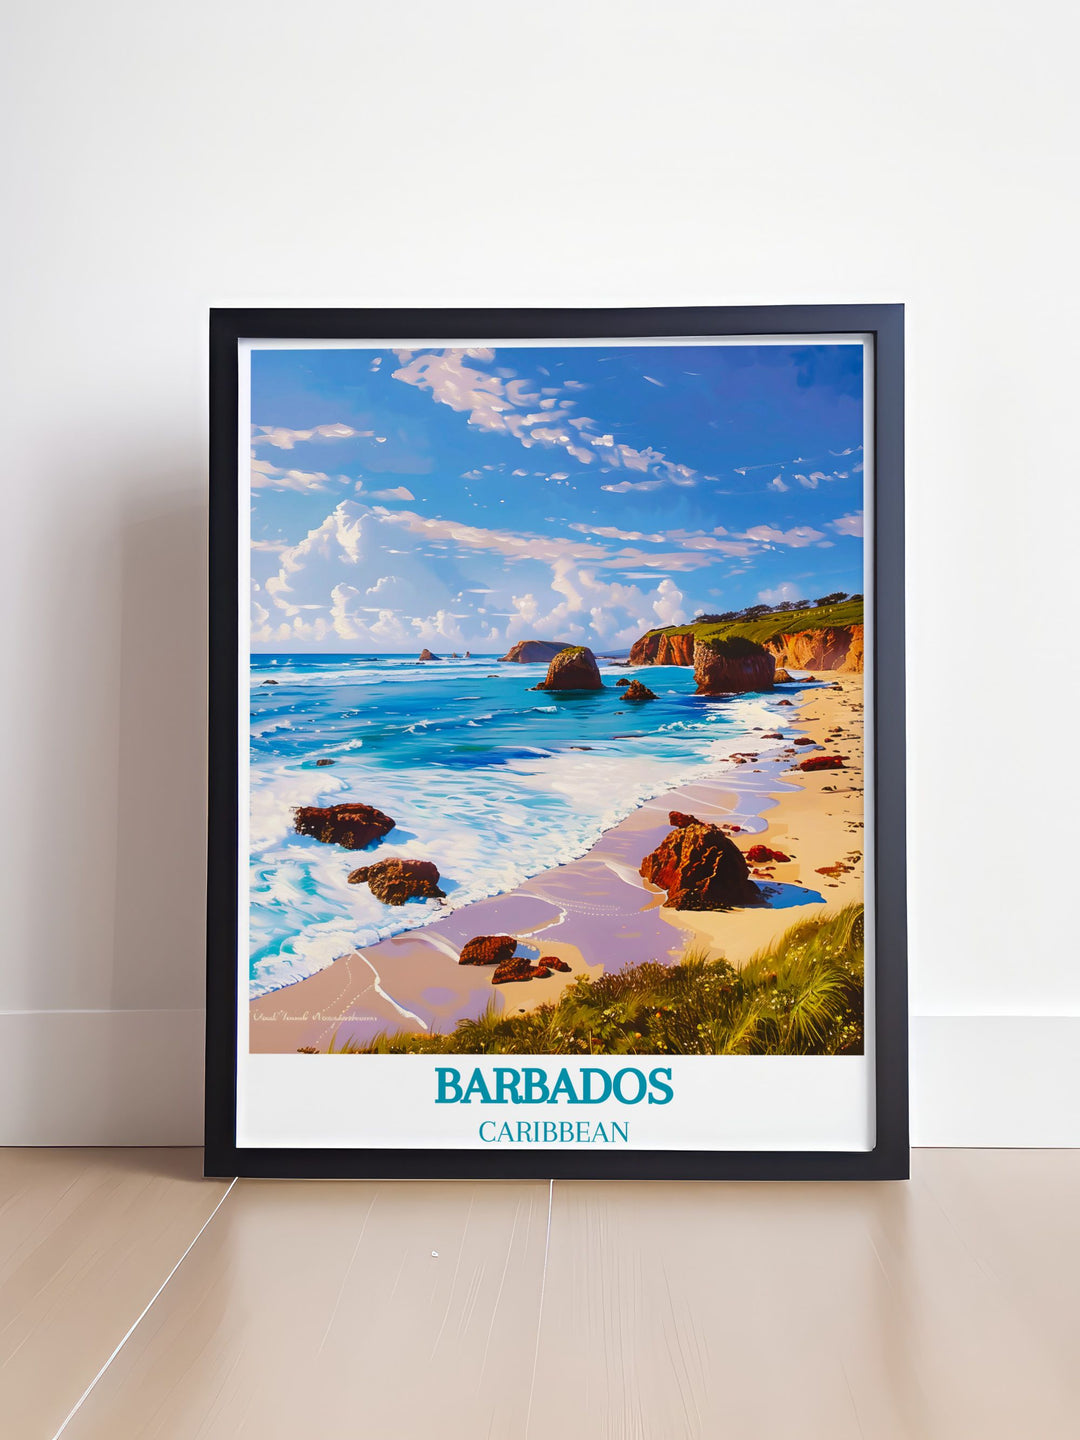 Caribbean canvas art featuring a vibrant scene of tropical beaches and clear blue waters, ideal for bringing the warmth and charm of the islands into your home.